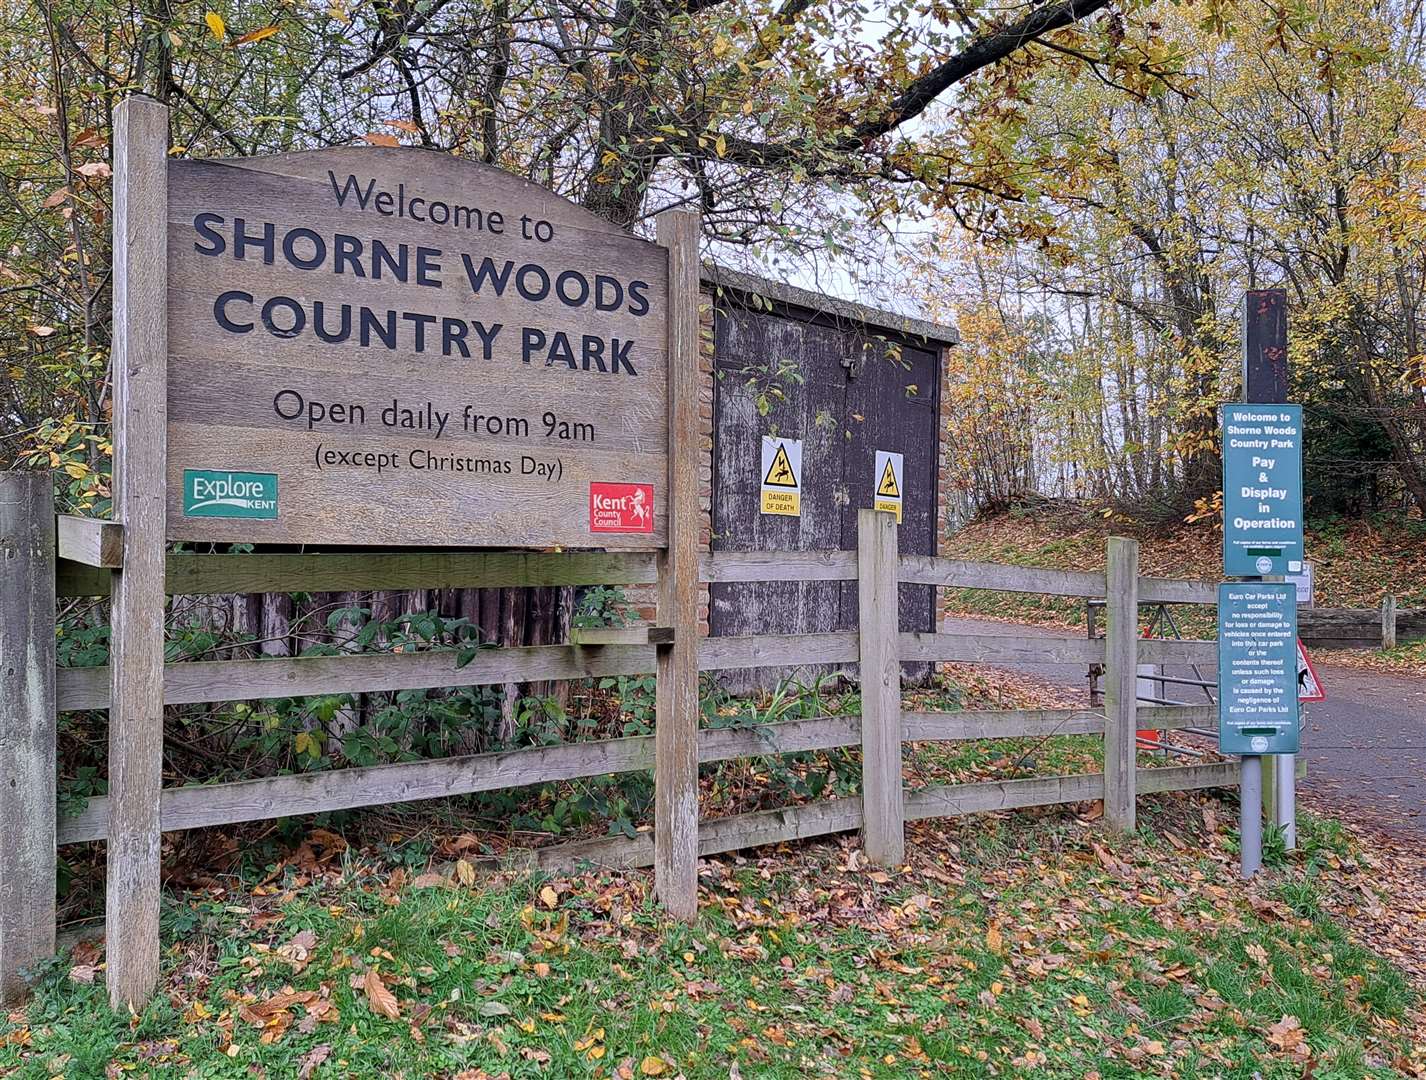 Shorne Woods Country Park has the most offenders